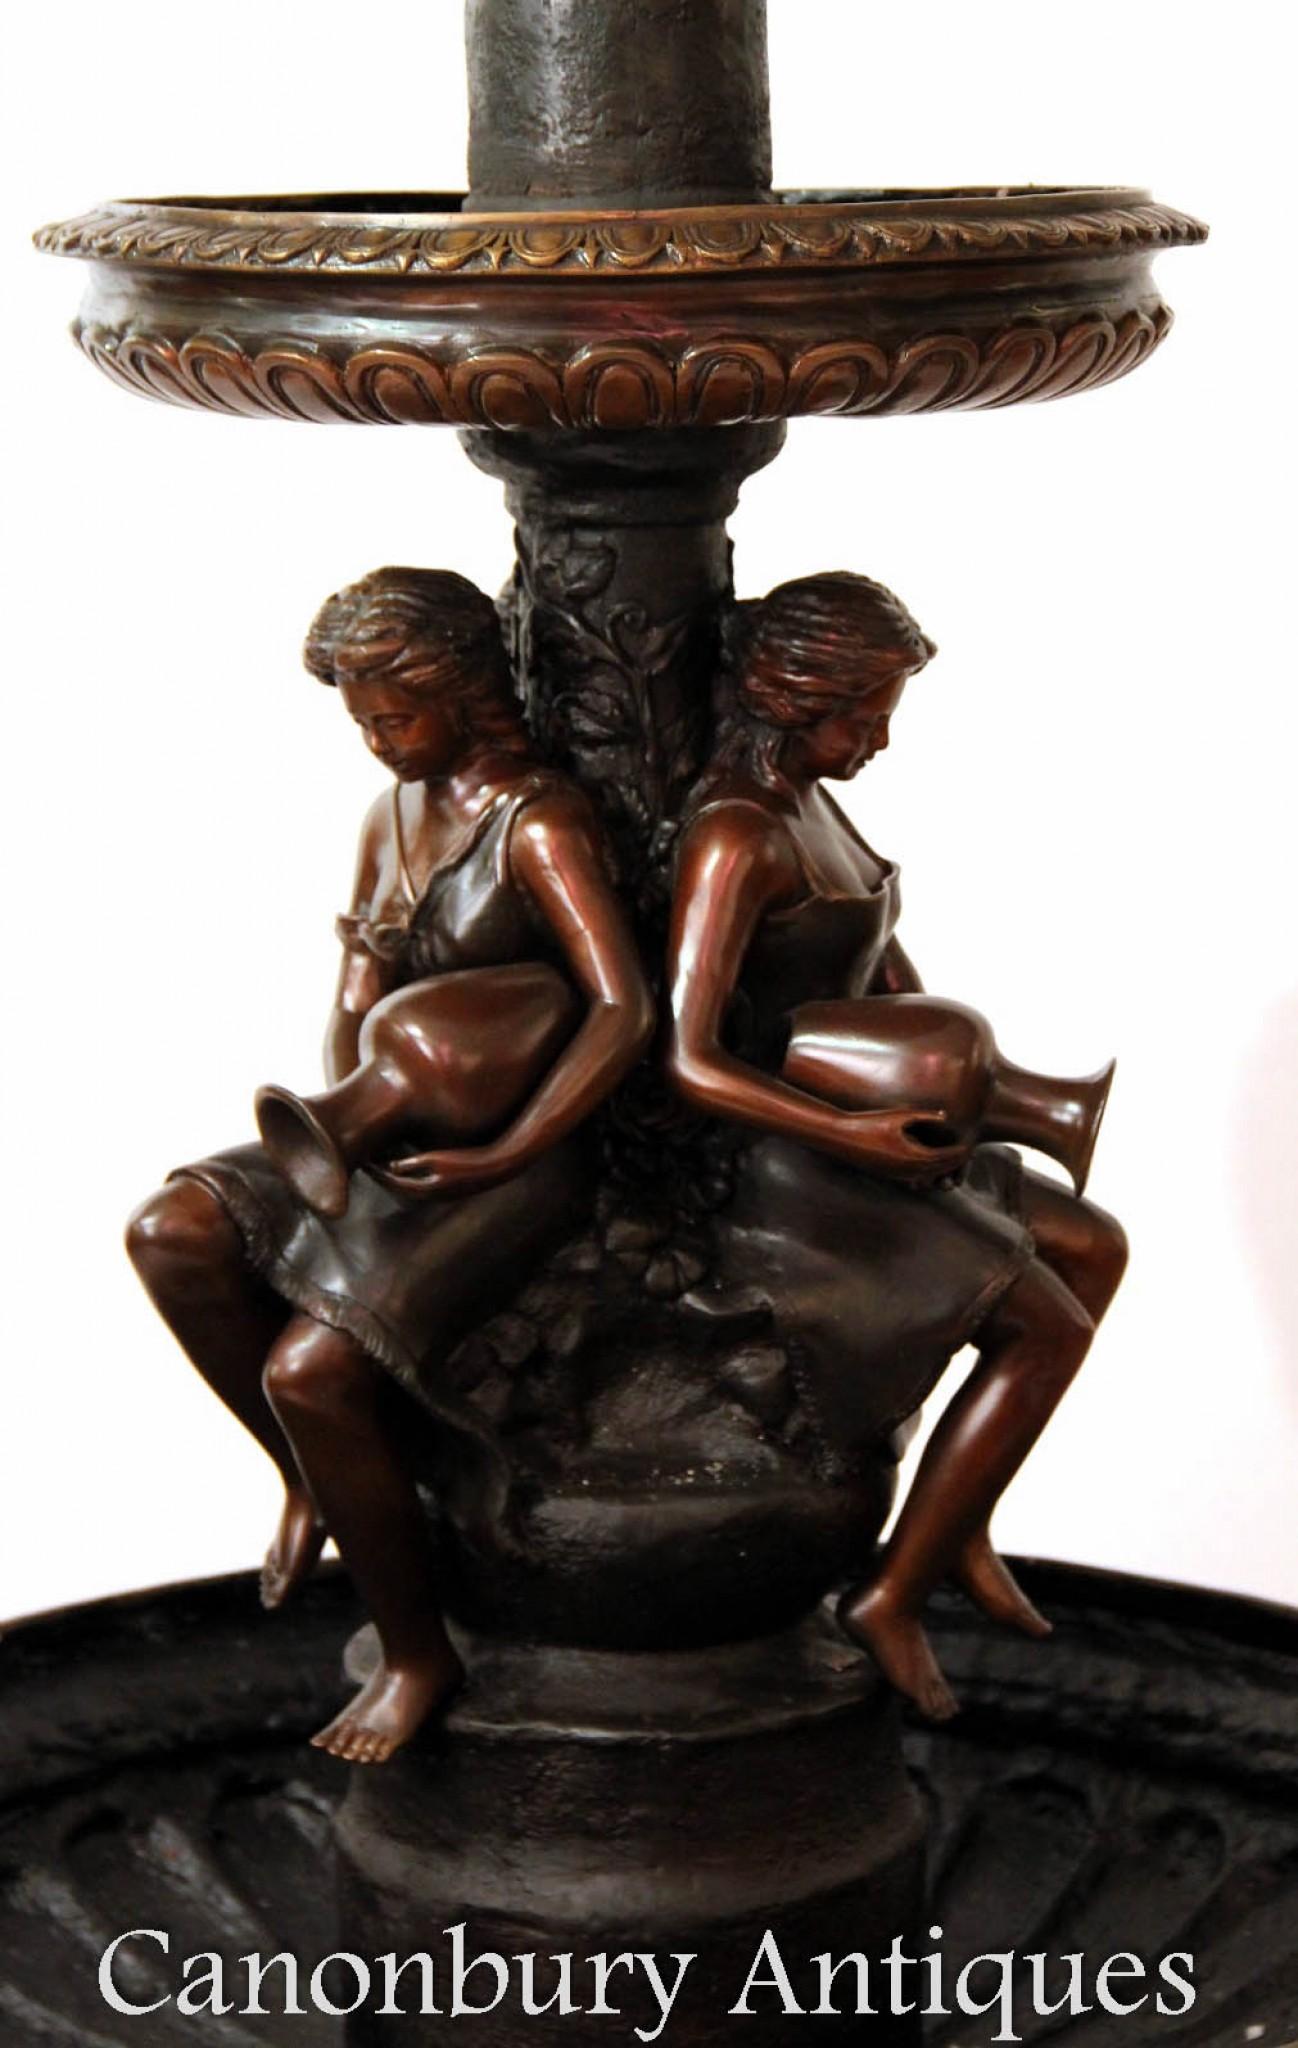 Cute French bronze garden fountain
Two tiers, first tier features the classical maidens with Amphora urns
Great patina to the bronze
Can you imagine this configured and flowing with water?
Bought from an architectural salvage company at Paris